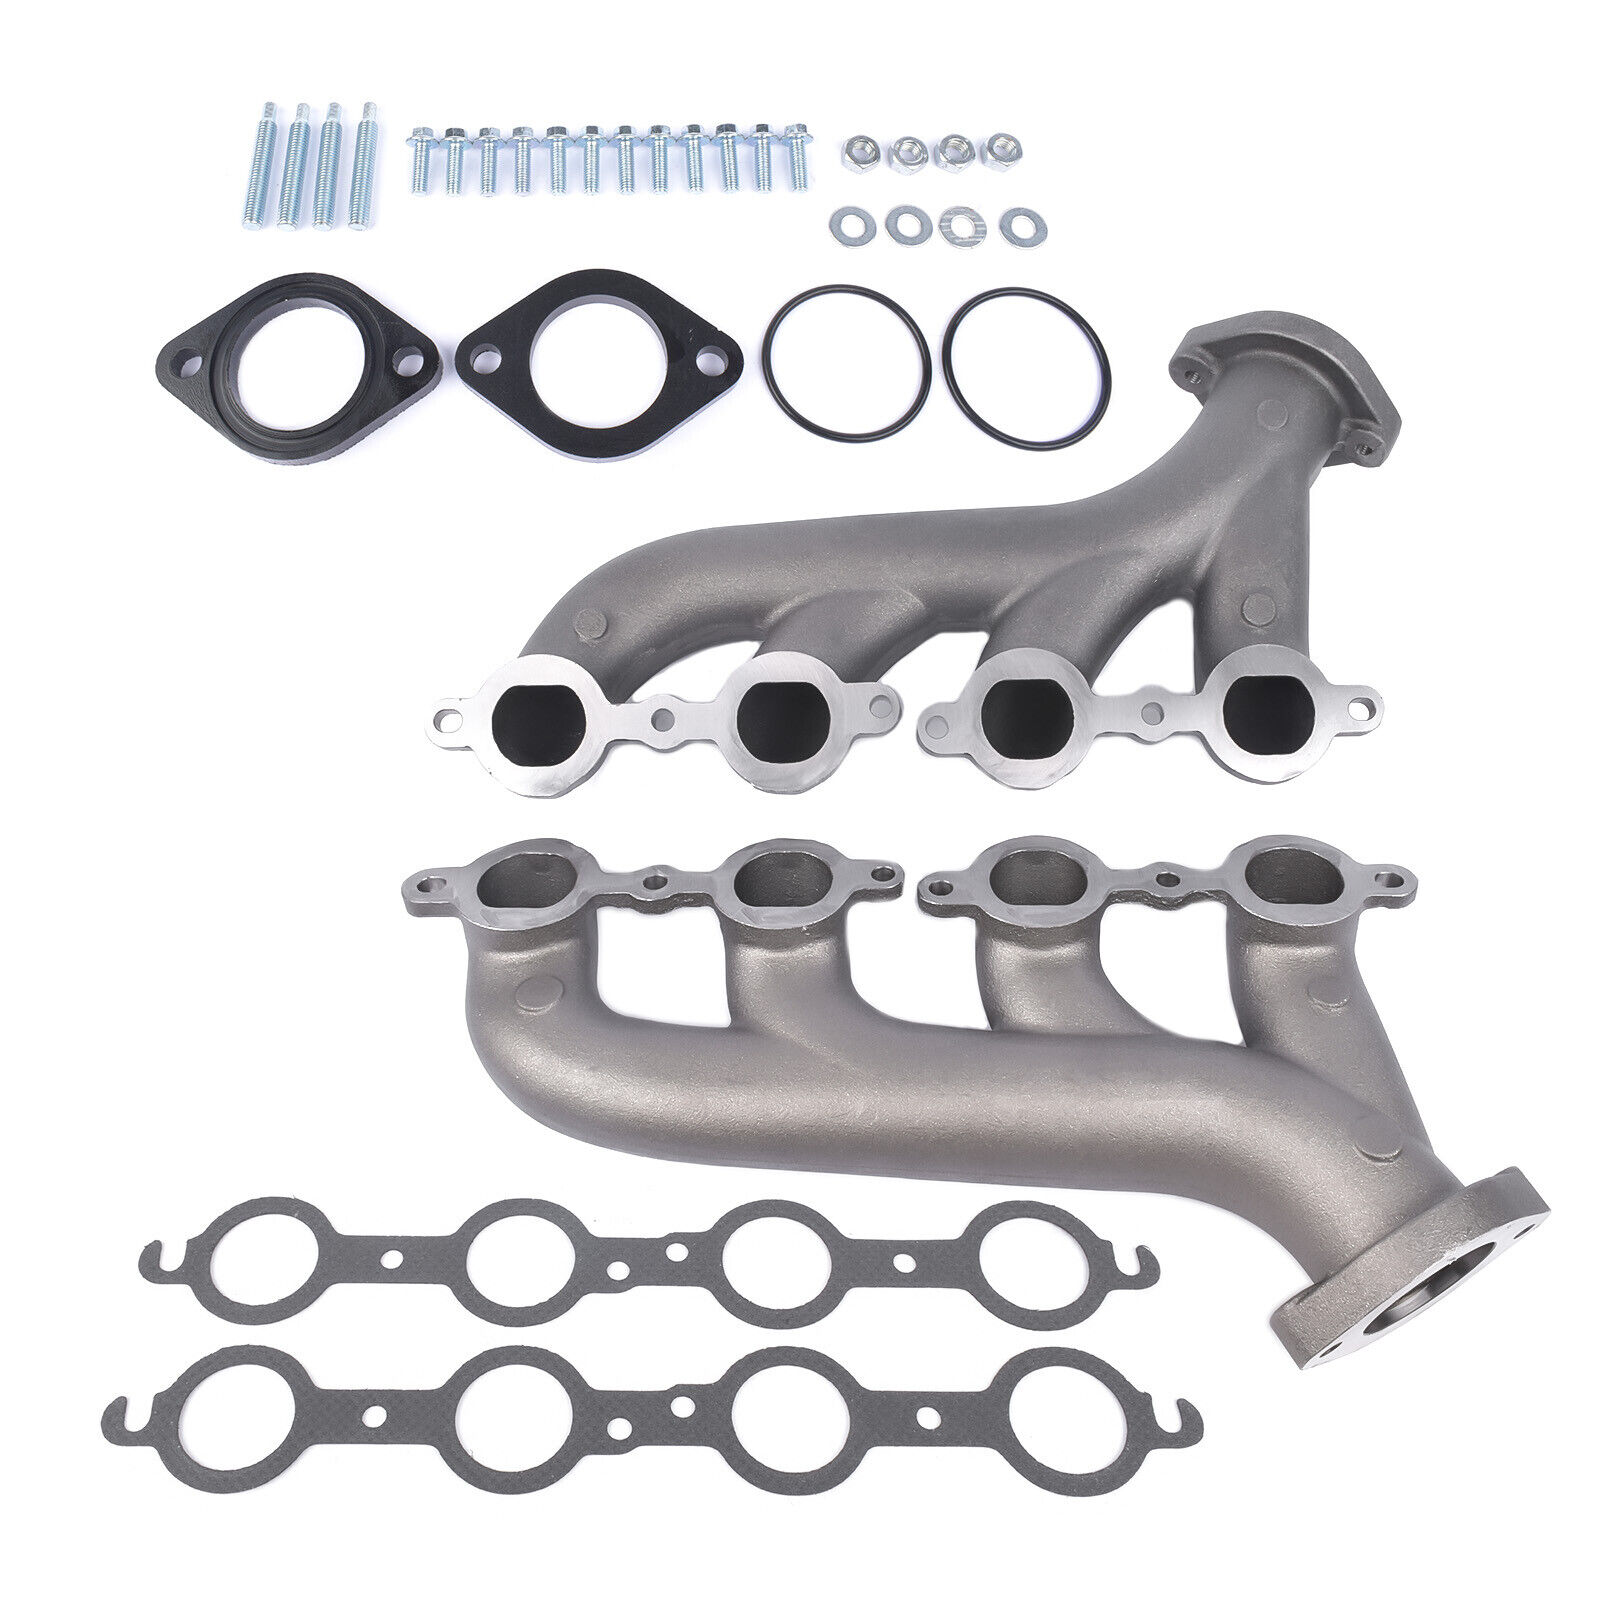 Cast Iron Exhaust Manifold with Gasket for Chevrolet LS1 LS2 LS3 4.8L 5.3L 6.0L